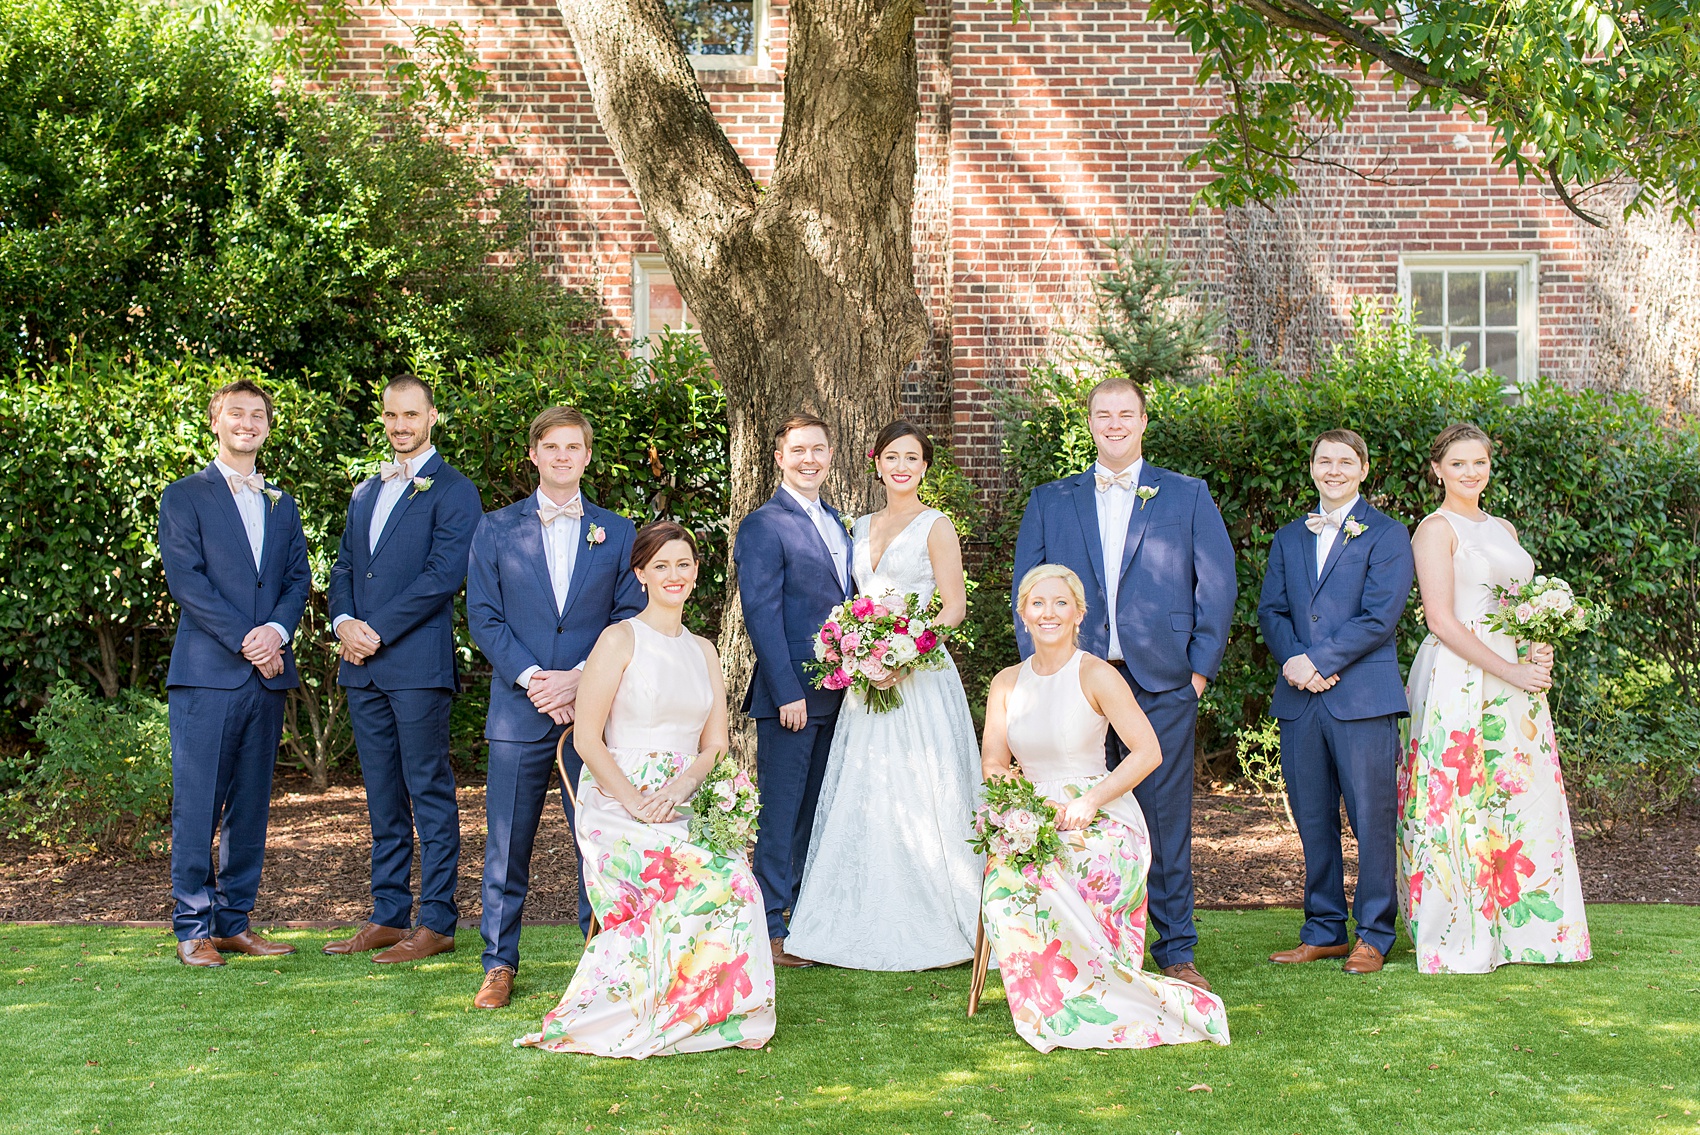 Mikkel Paige Photography pictures from a wedding at Merrimon-Wynne House in Raleigh, NC. Creative photo of the bridal party on the lawn of the historic home. The bridesmaids wore pink dresses with a colorful floral pattern and groomsmen wore blue linen suits.